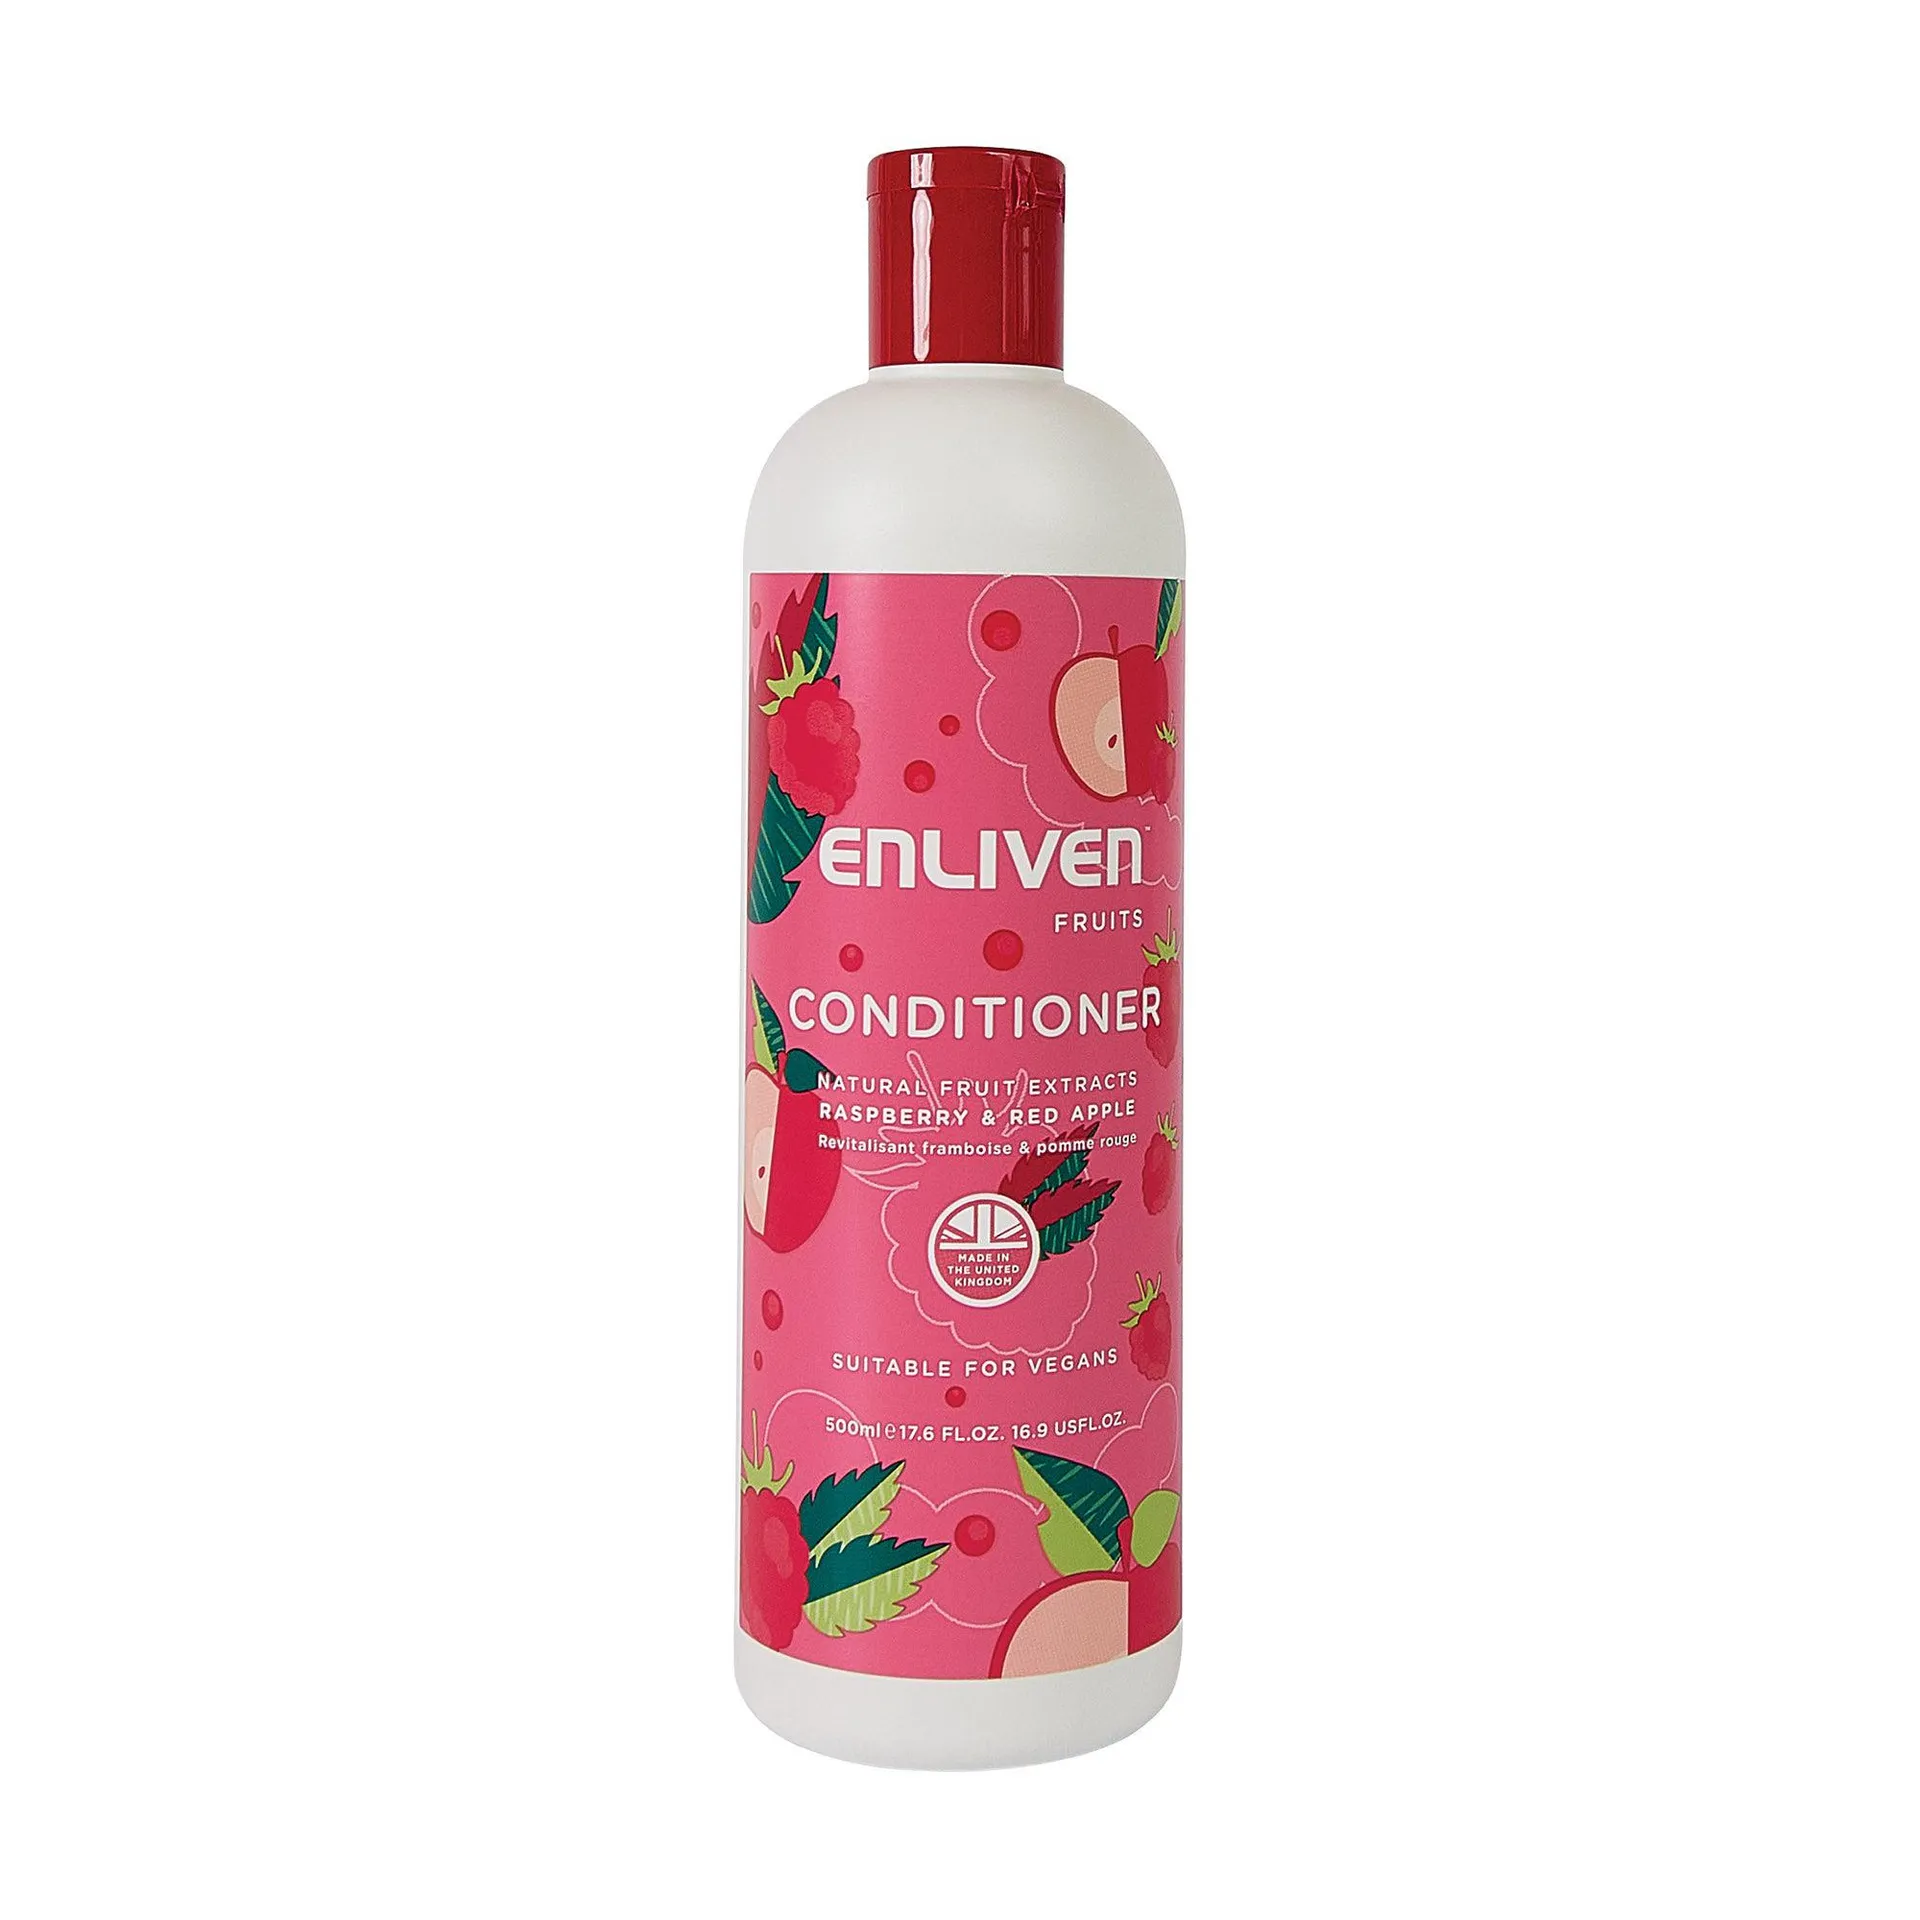 Enliven Naturals Conditioner Raspberry & Red Apple 500ml